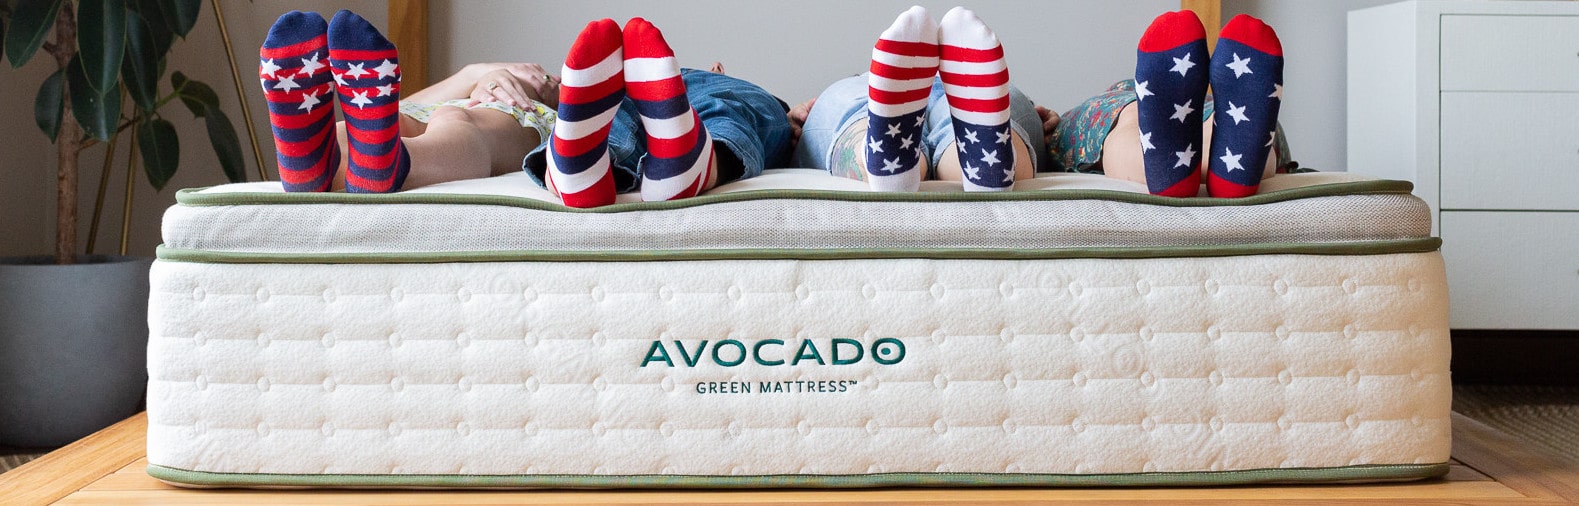 avocado mattress for large people